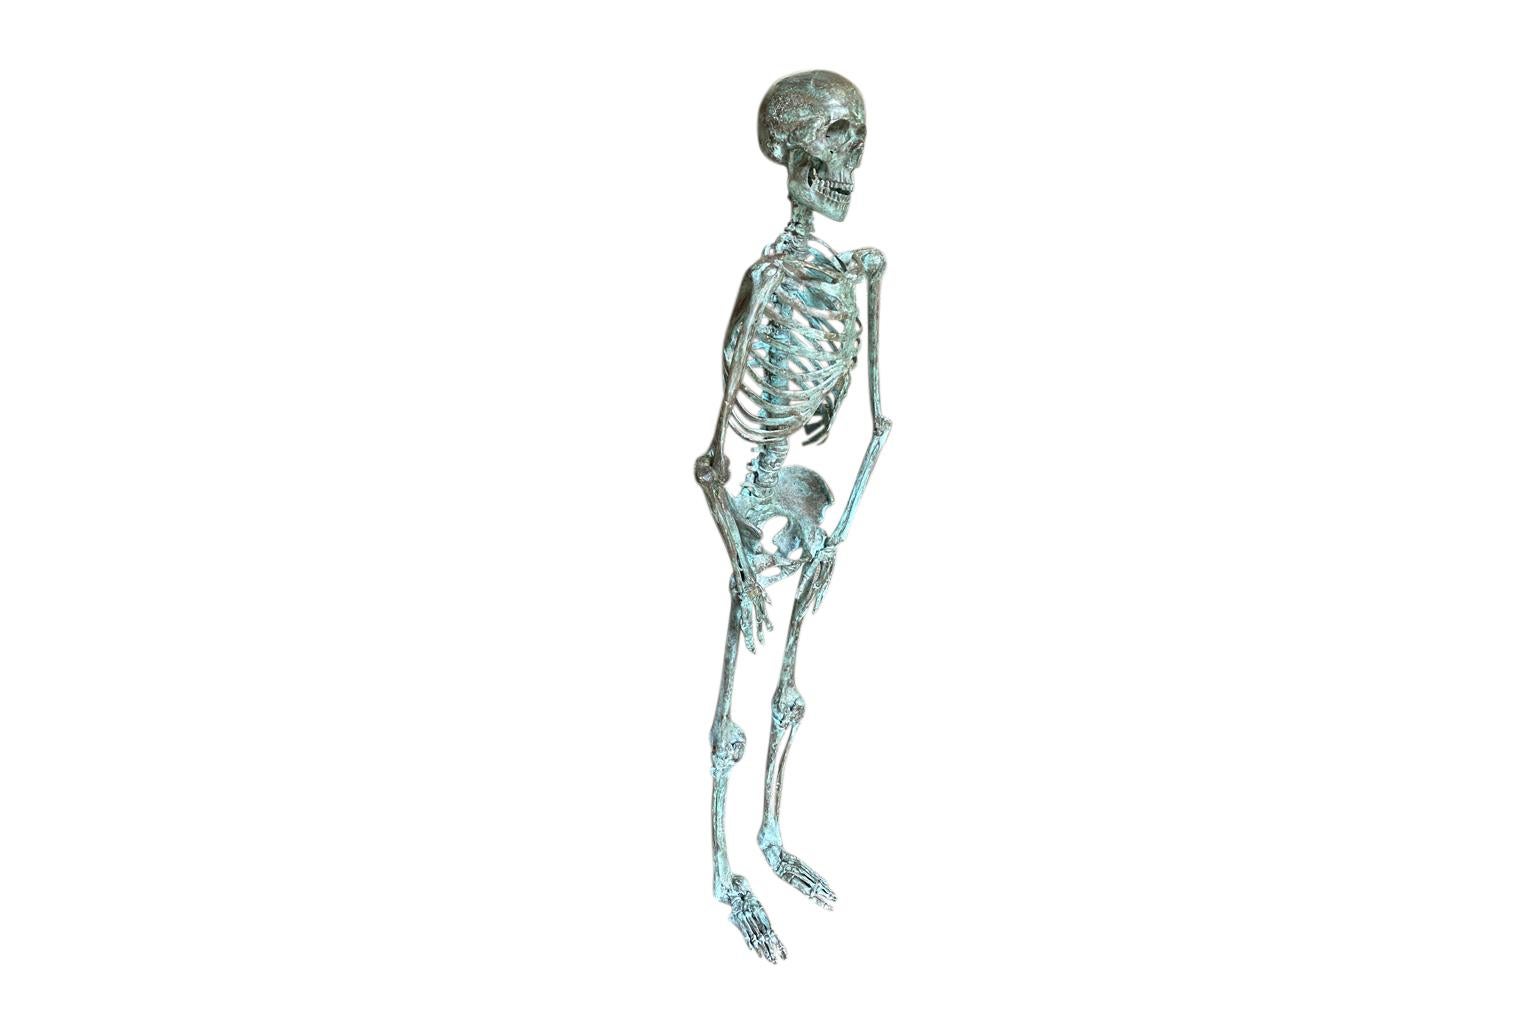 A sensational 19th century skeleton in bronze originating from the Louvain University Of Medicine - Belgium. An excellent addition to any doctor's office.